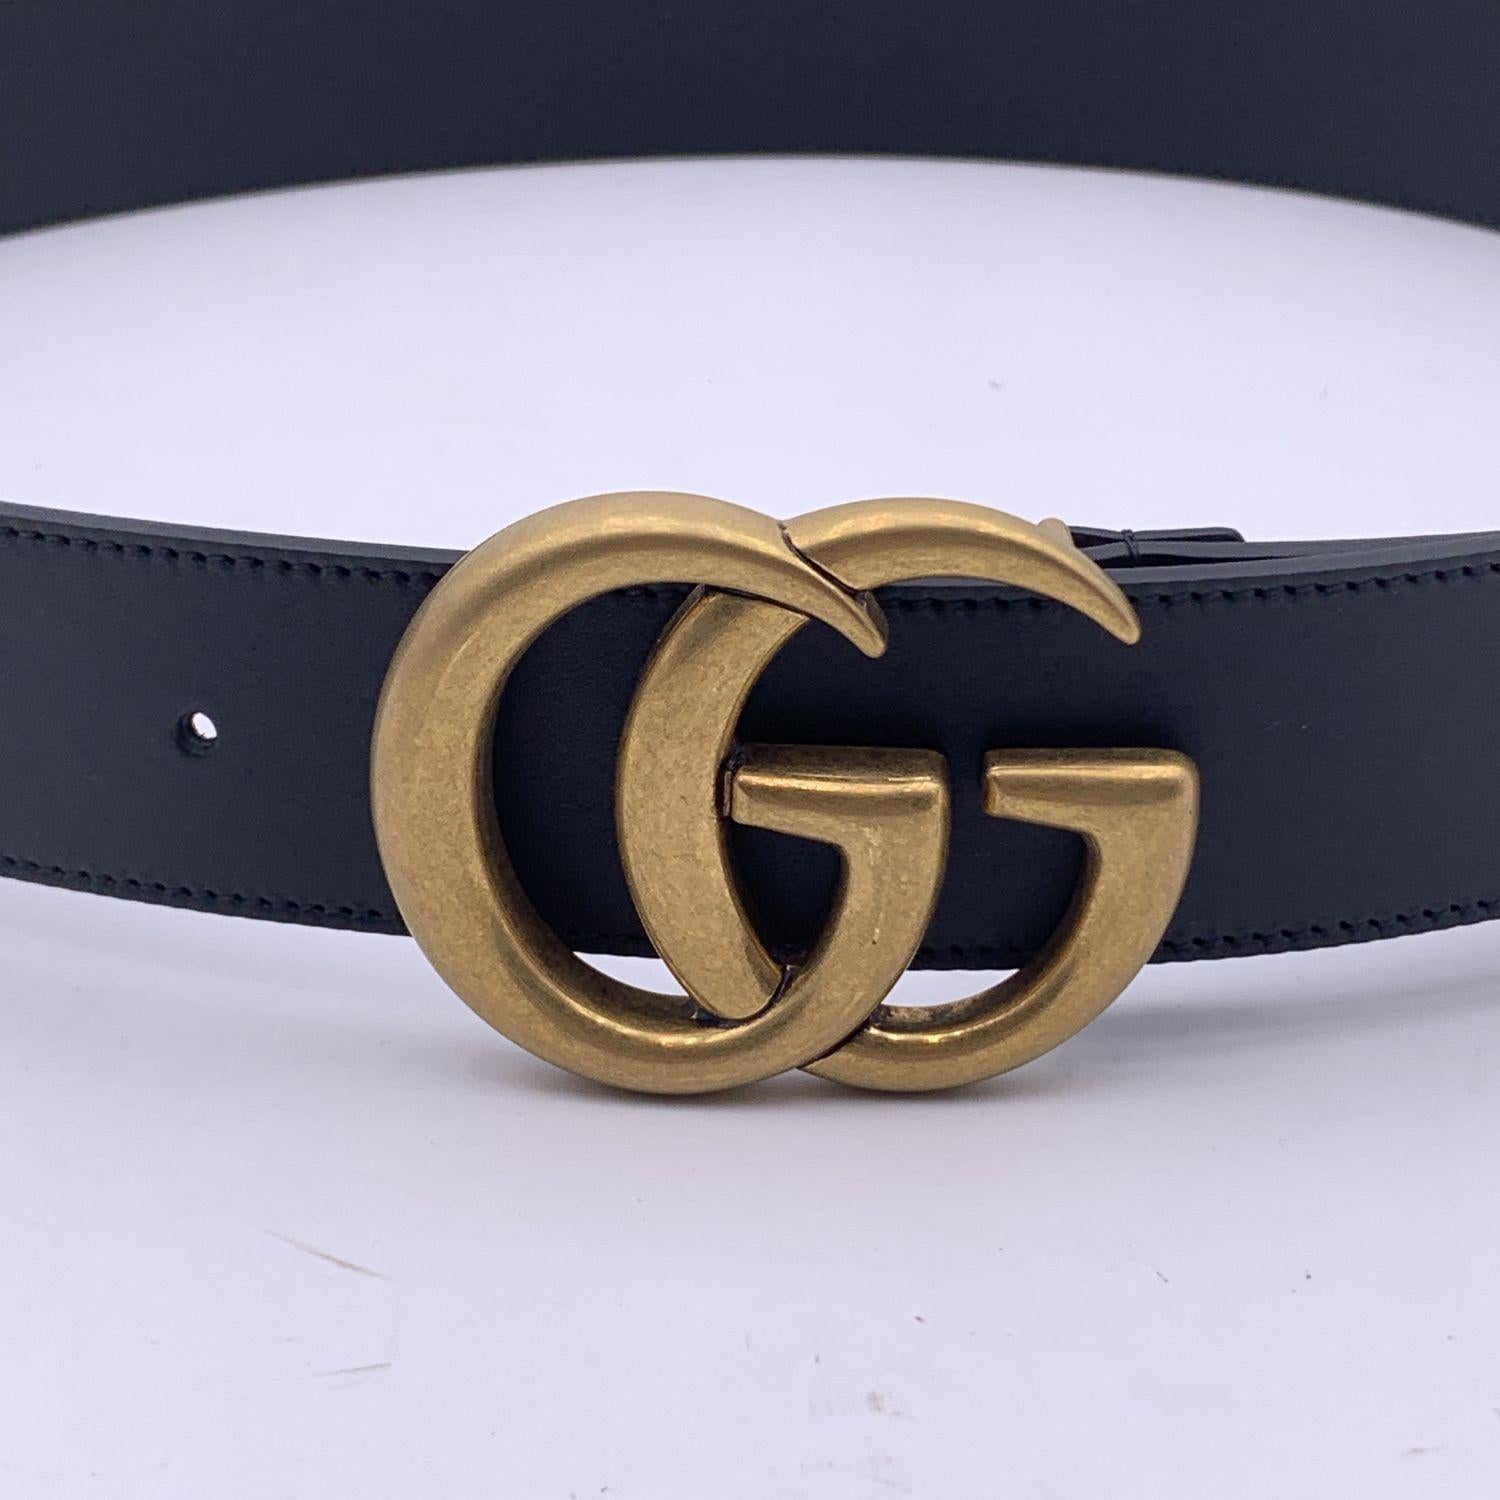 Women's or Men's Gucci Black Leather Marmont Belt with GG Buckle Size 110/44